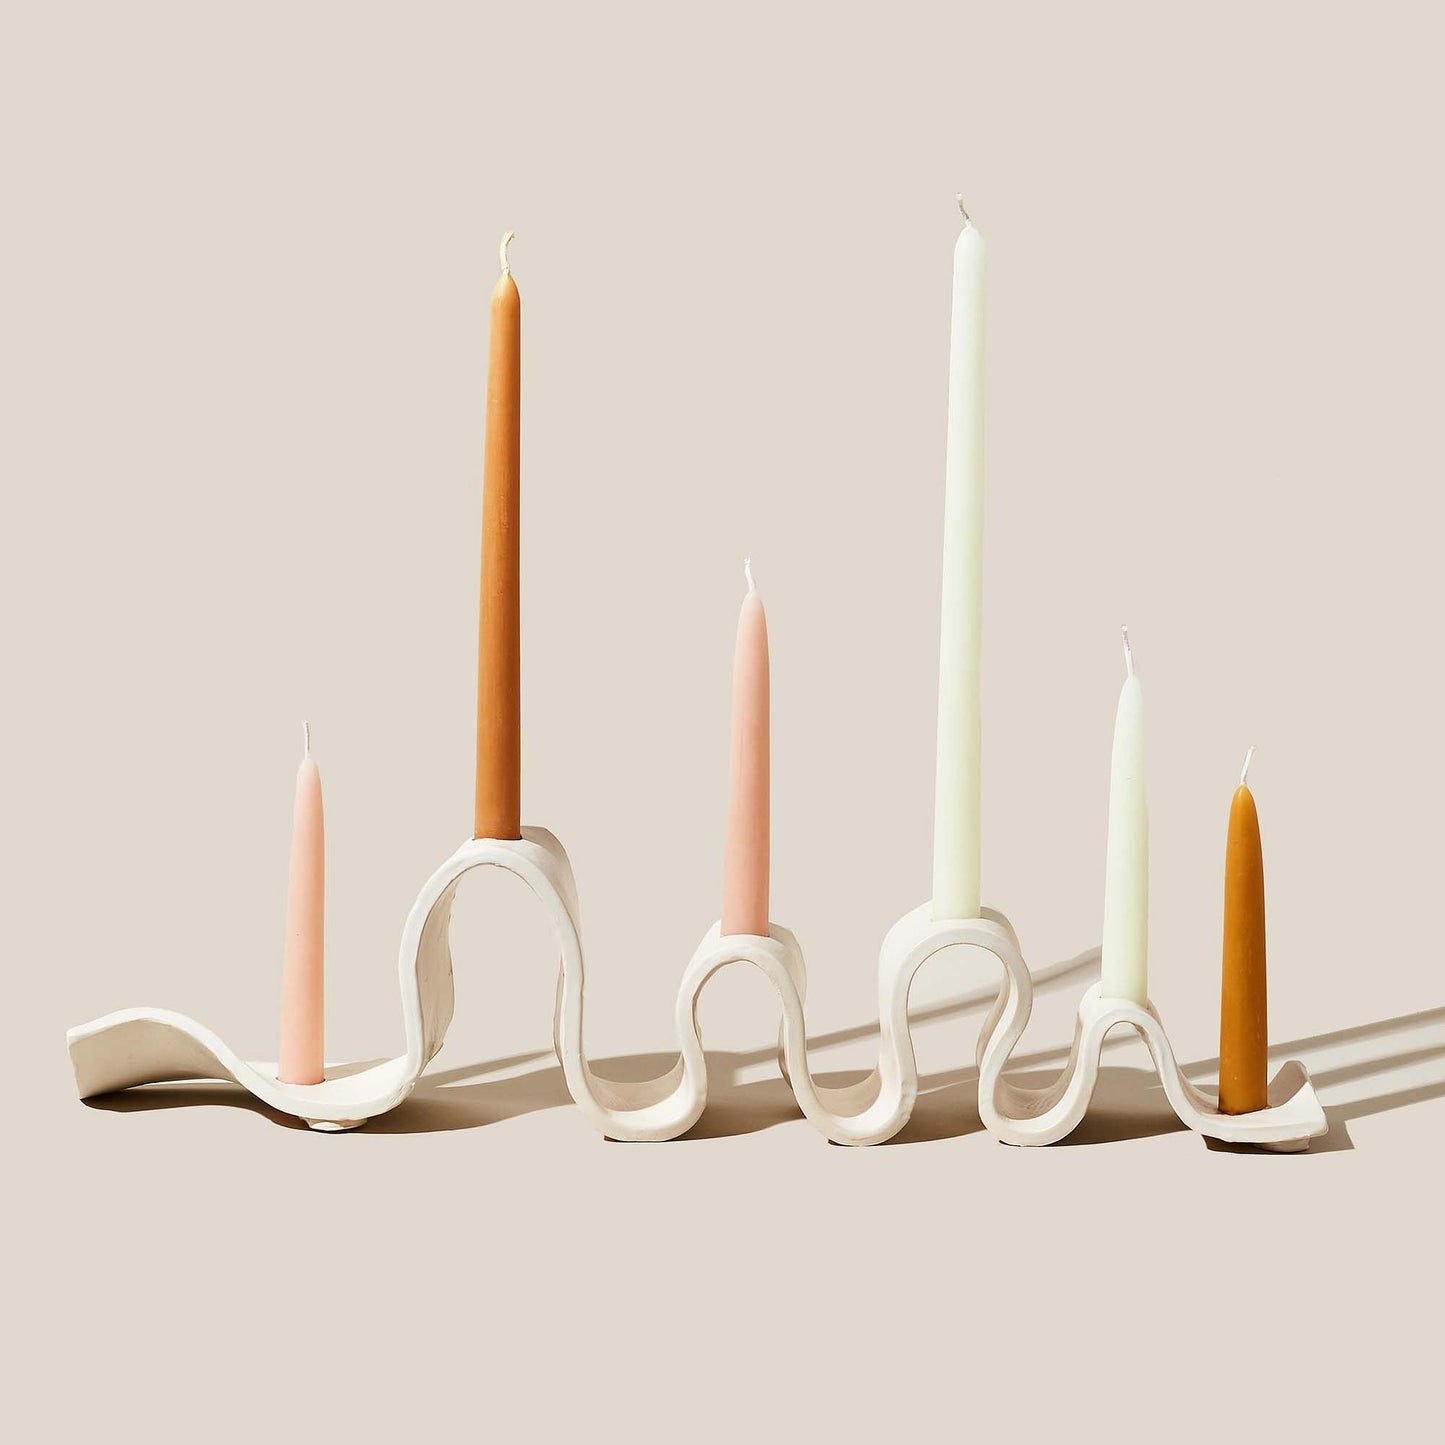 Meet Weylyn: A candelabra whose dramatic and unique appearance as a centerpiece that'll demand more attention than even your most vocal guest. Handmade in Brooklyn, NY.